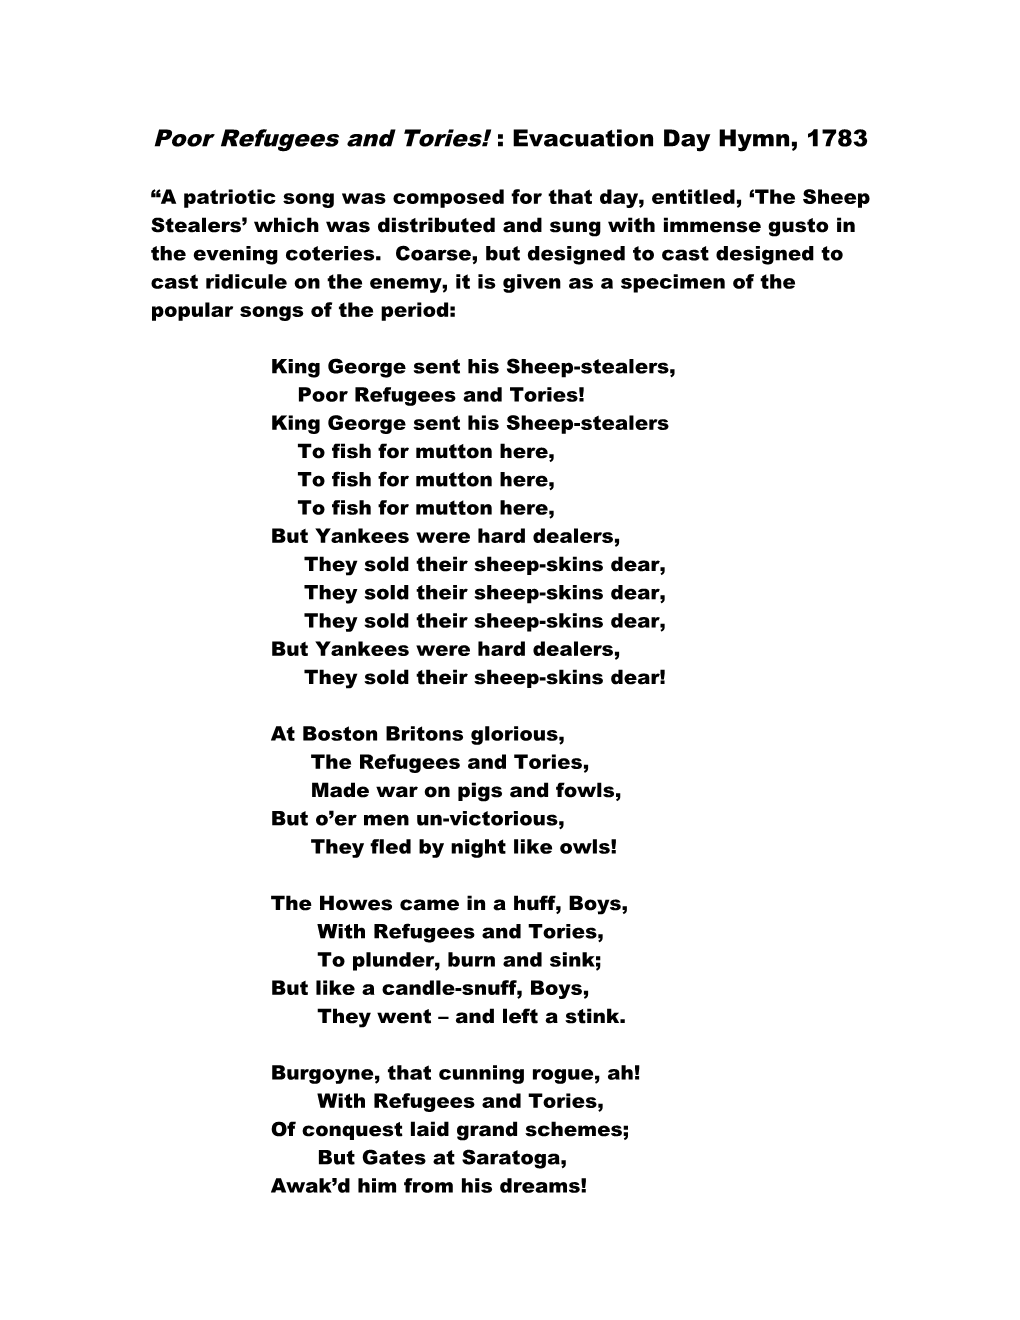 Poor Refugees and Tories!: Evacuation Day Hymn, 1783